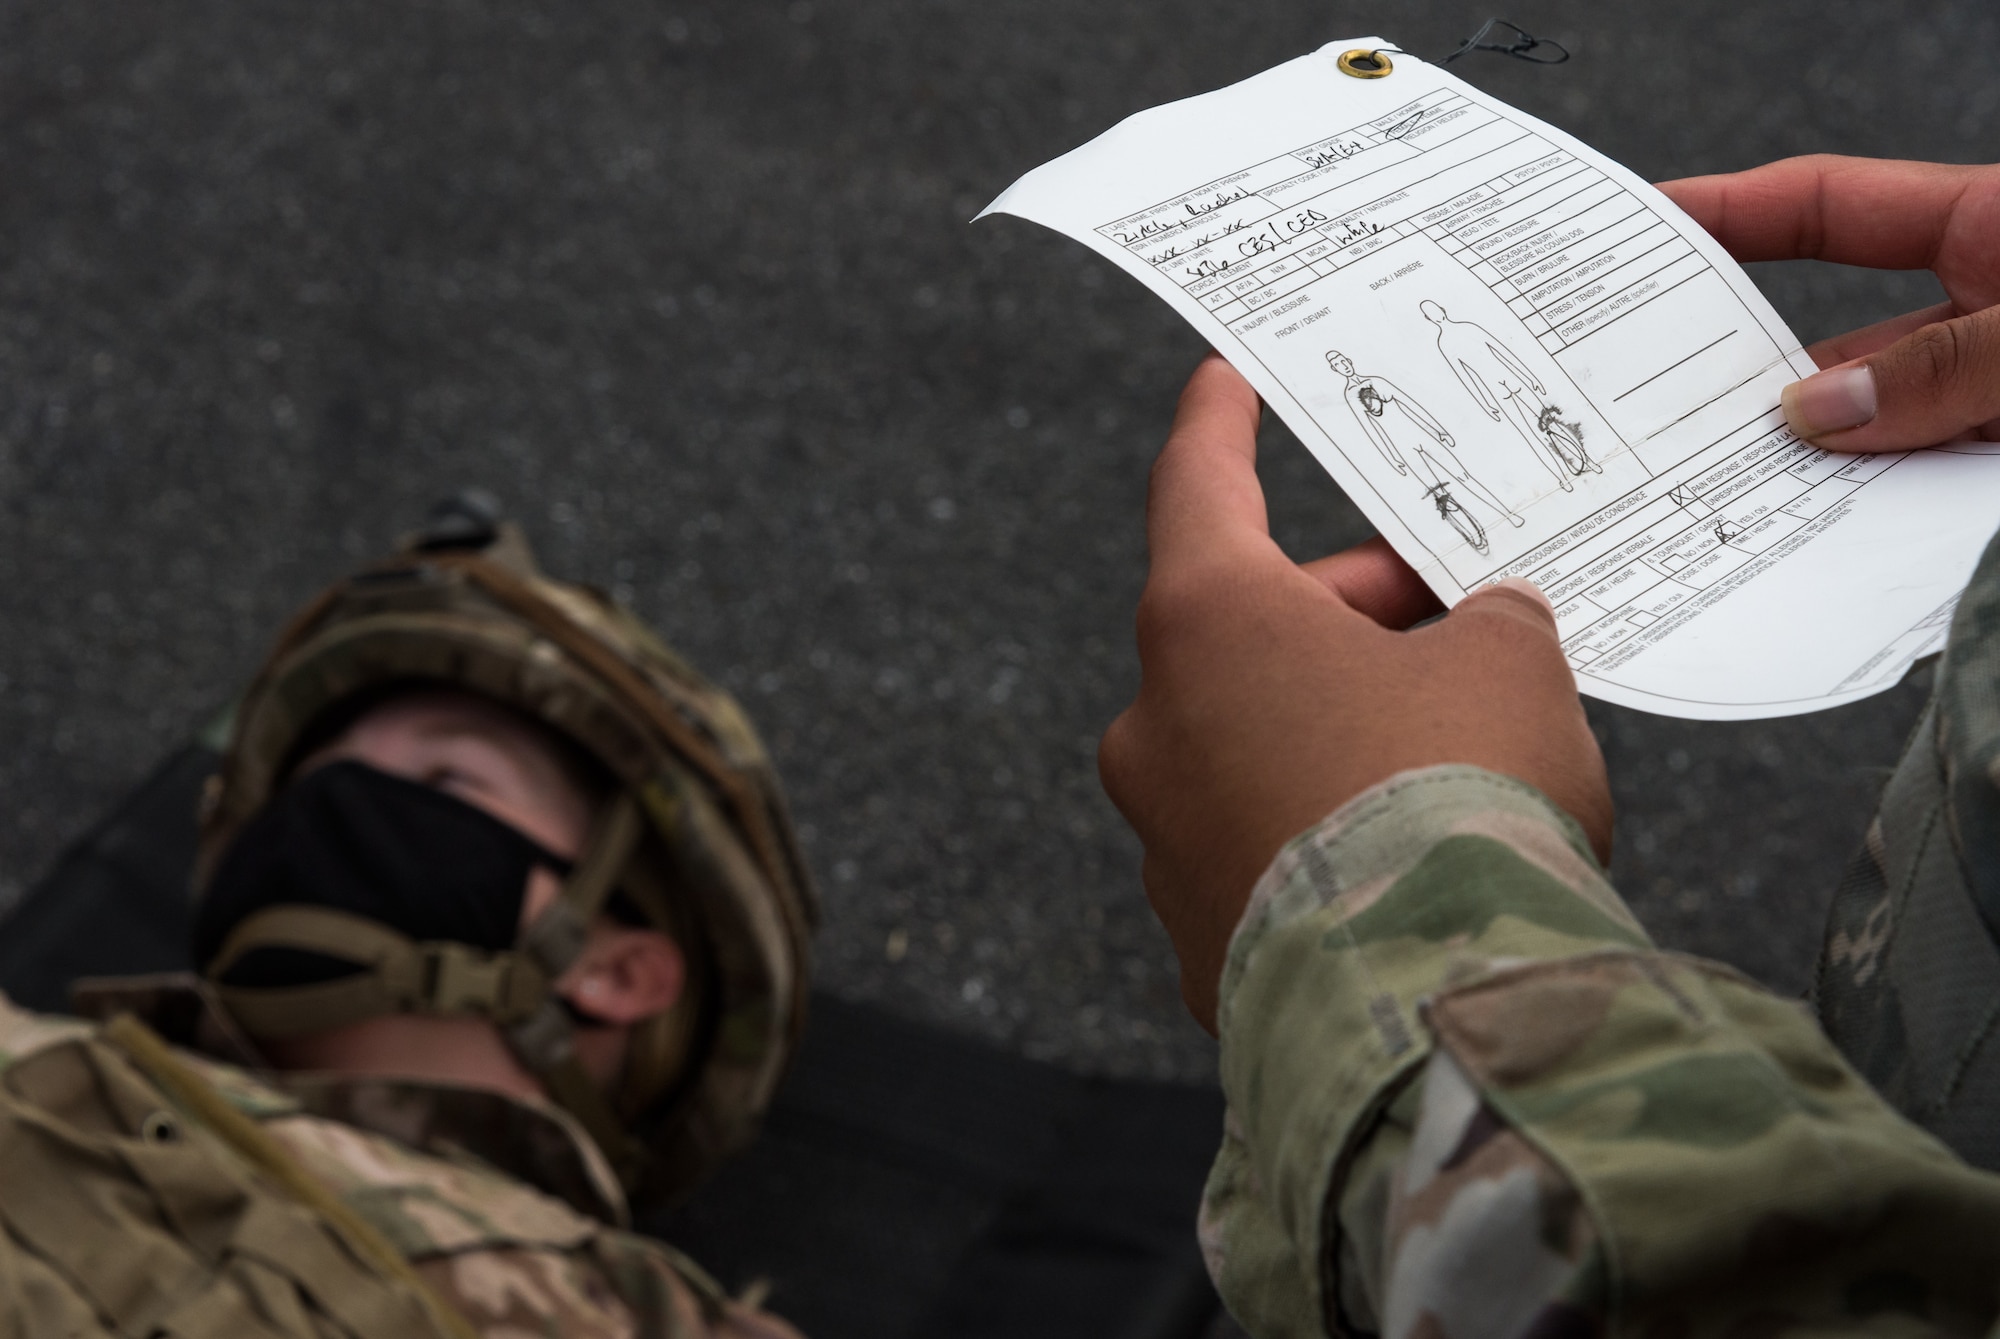 As part of a self-aid and buddy care training exercise, a 436th Civil Engineer Squadron Prime Base Engineer Emergency Force member reviews a tactical combat casualty care card identifying simulated injuries to Senior Airman Rachel Zirkle, 436th CES explosive ordnance disposal journeyman, Oct. 21, 2020, on Dover Air Force Base, Delaware. Sixty-four Prime BEEF members made up 10 teams in a 96-hour readiness exercise that included SABC, vehicle convoy techniques and land navigation exercises prior to arriving at the Tactics and Leadership Nexus. While at the TALN, they participated in night vision goggle familiarization; chemical, biological and radiological and nuclear defense training; individual movement techniques; and defense fighting position exercises. (U.S. Air Force photo by Roland Balik)